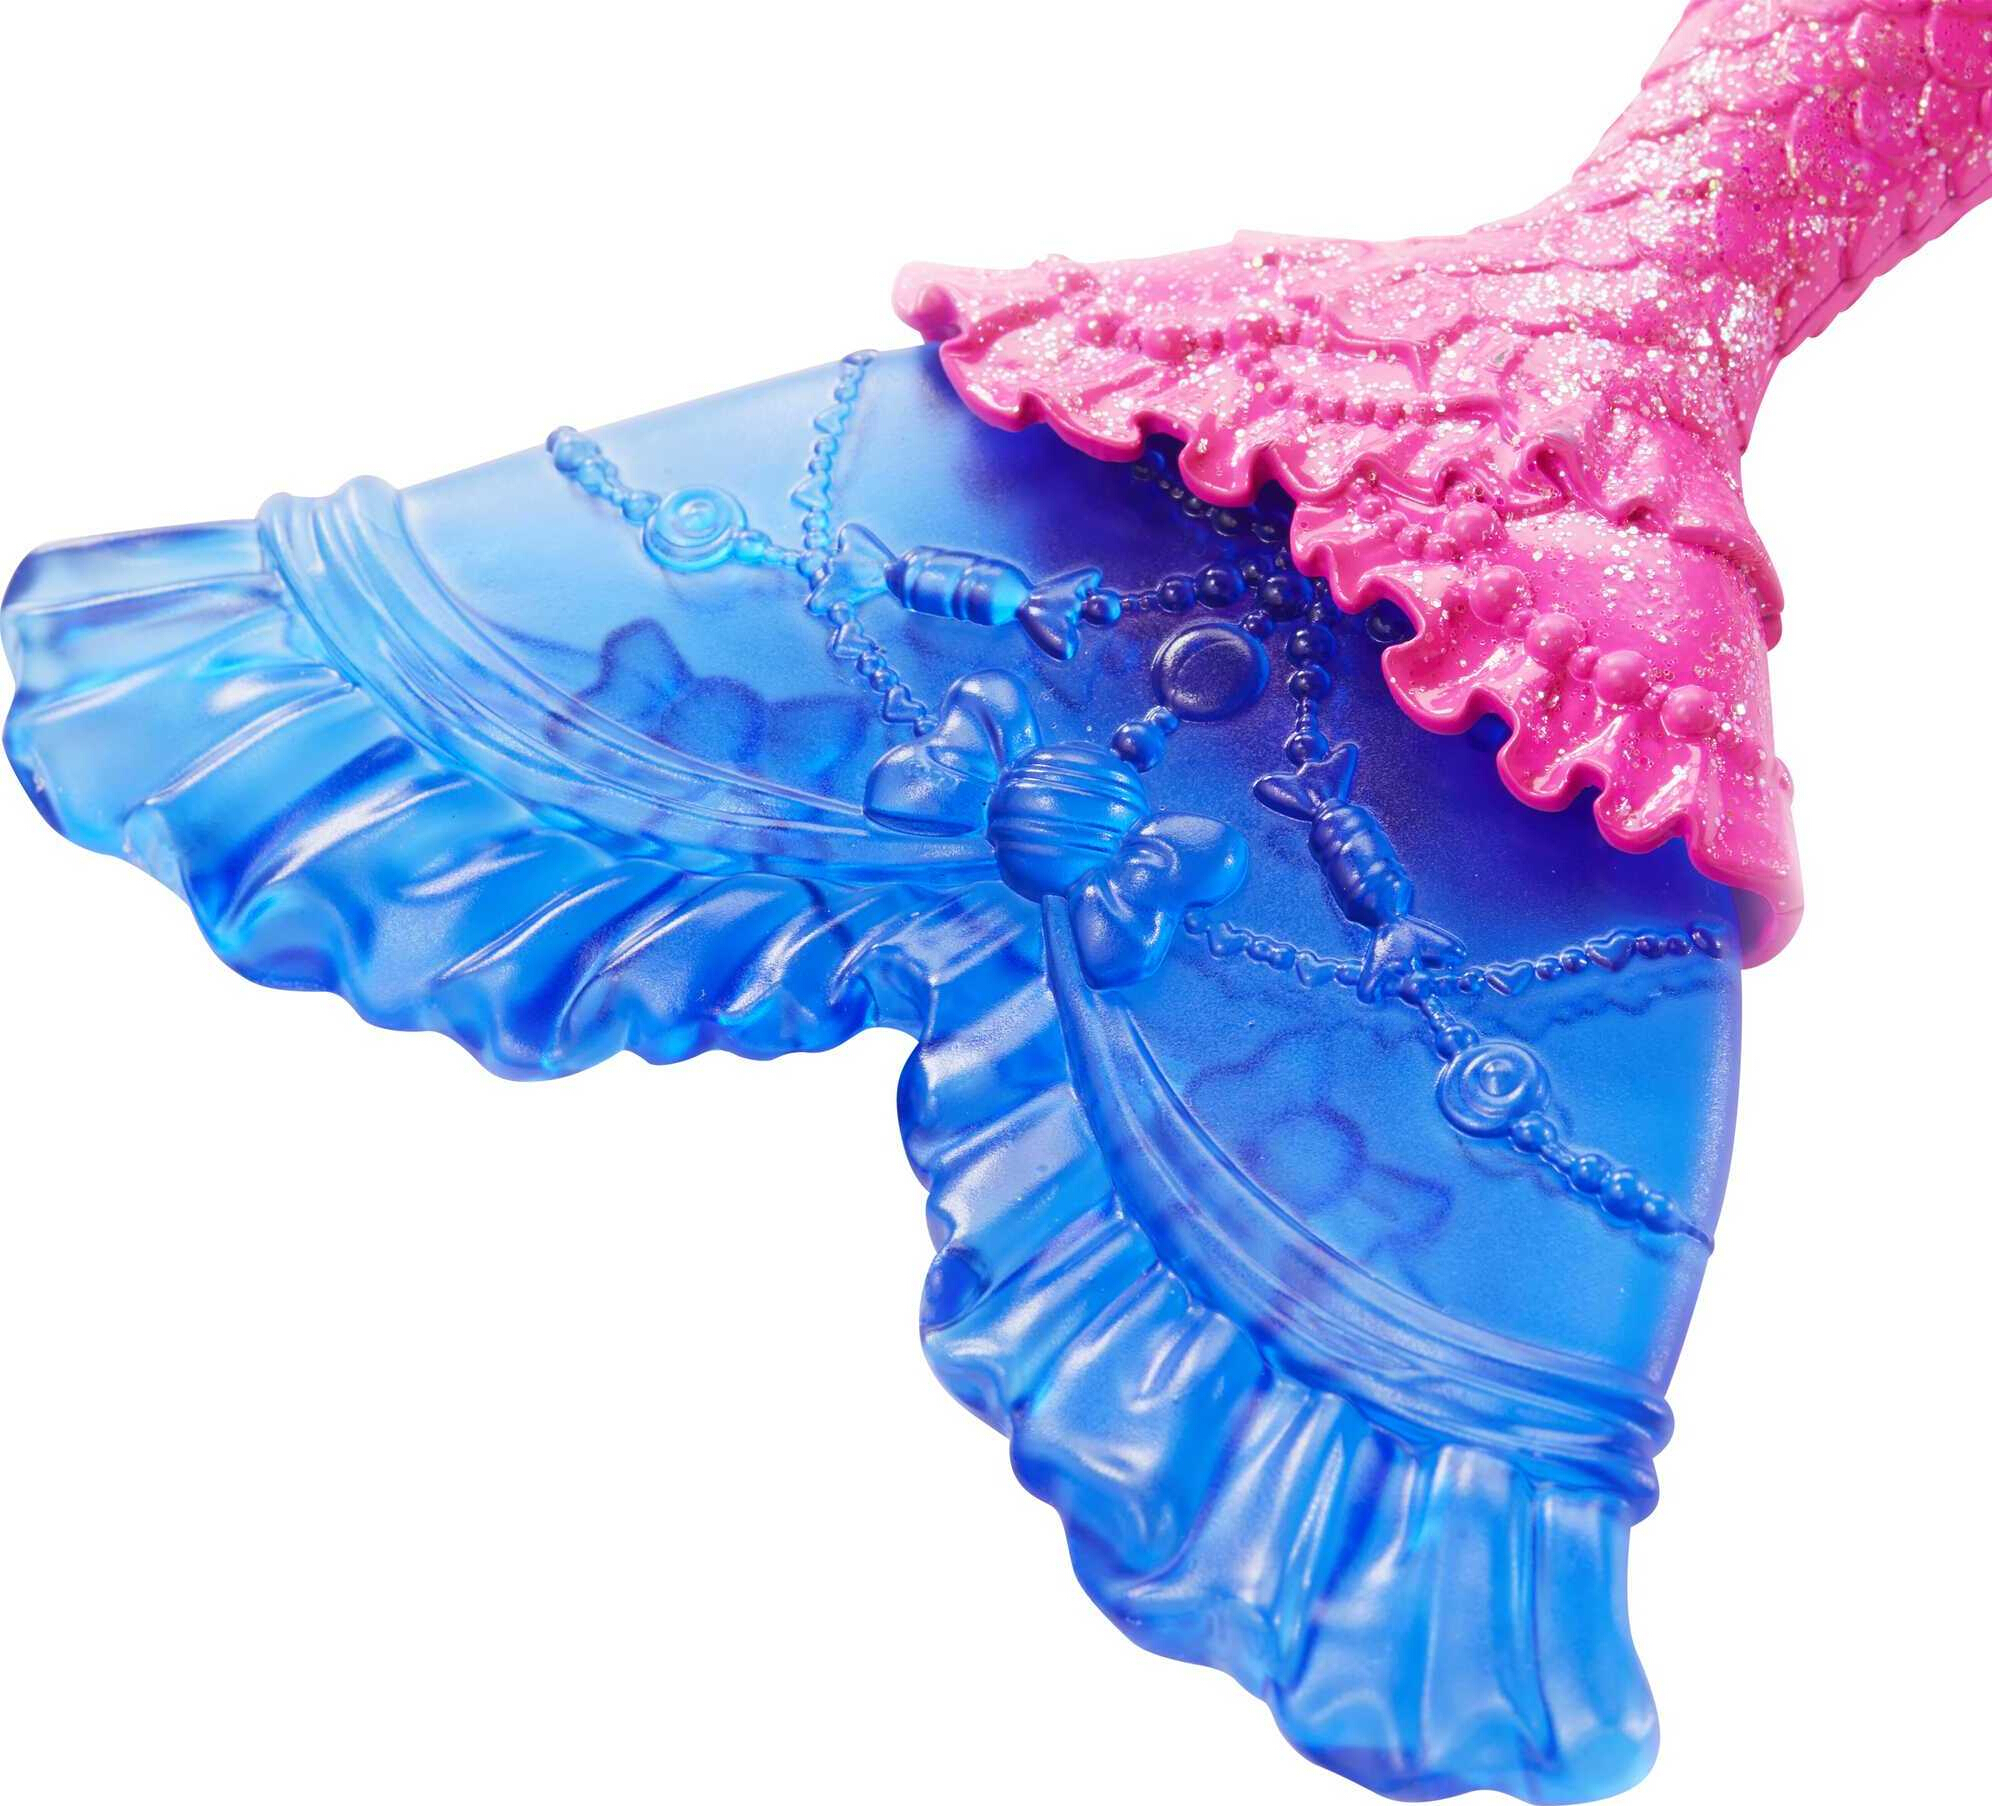 Barbie Dreamtopia Mermaid Doll with Pink & Blue Hair & Tail, Plus Tiara Accessory - image 4 of 6